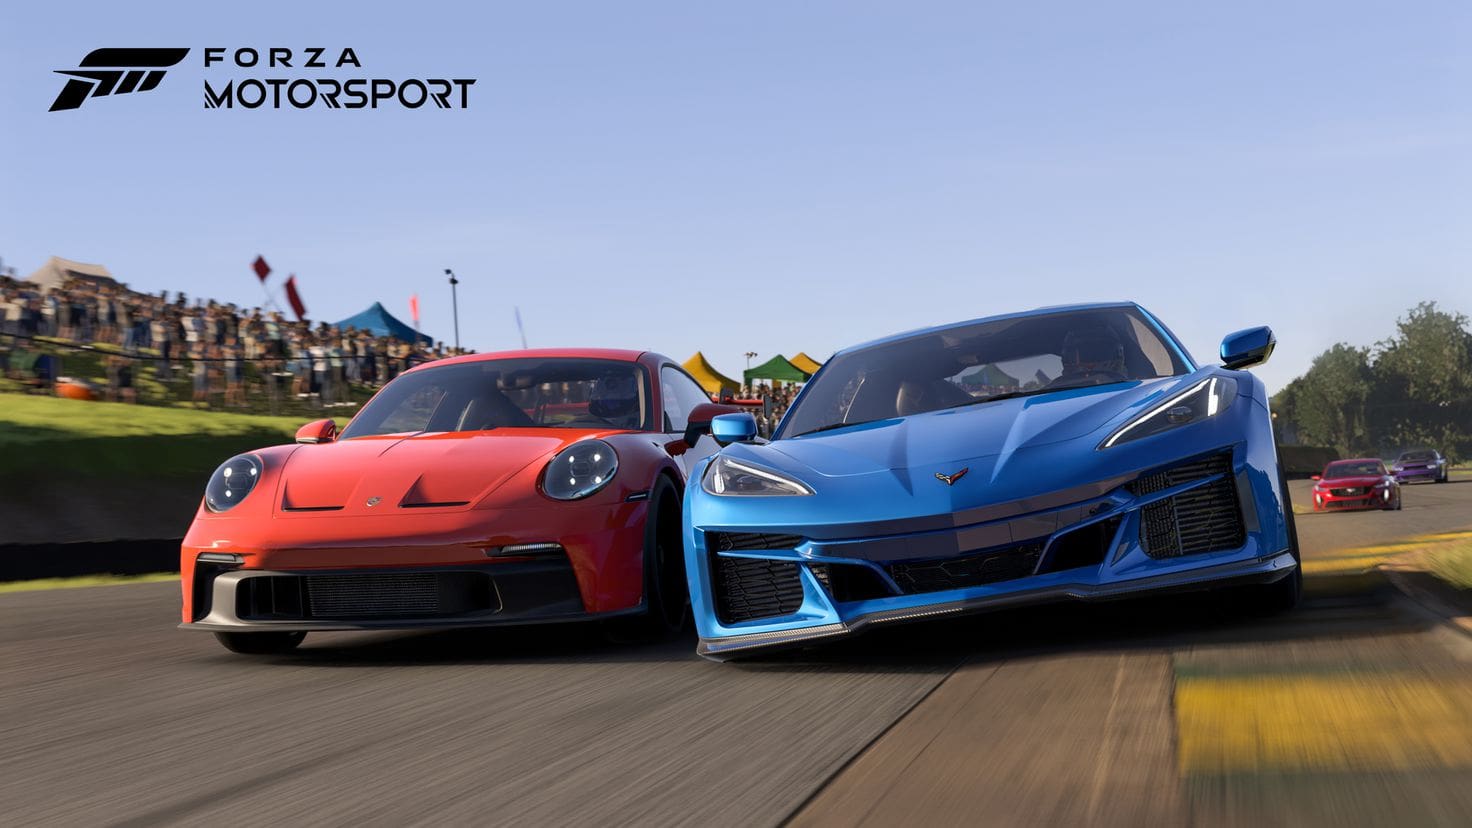 Refund for Forza Motorsport purchased 